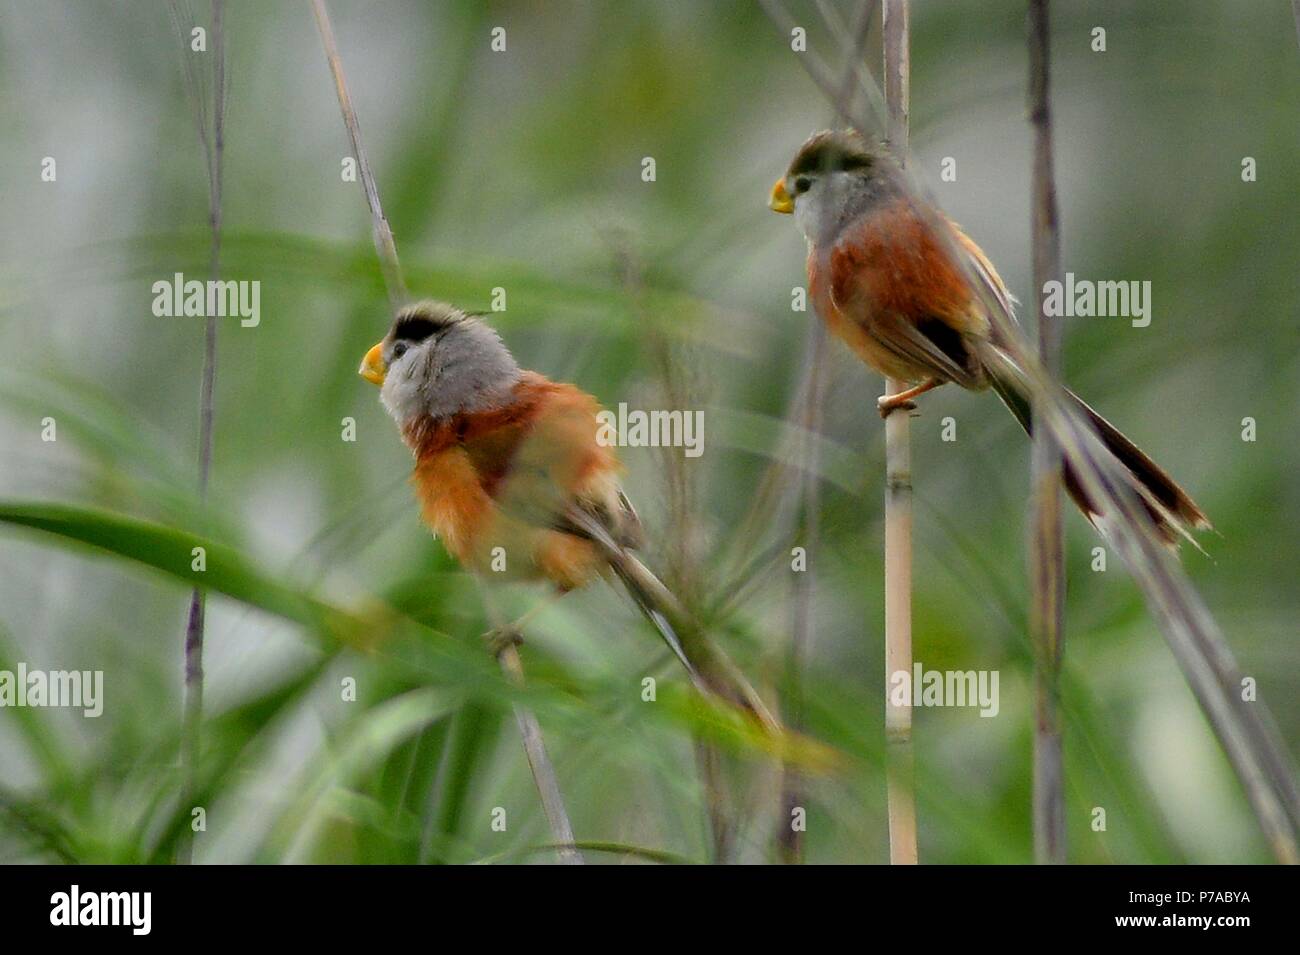 Qingdao, Qingdao, China. 5th July, 2018. Qingdao, CHINA-Reed parrotbills can be seen in Qingdao, east China's Shandong Province. The reed parrotbill (Paradoxornis heudei) is a species of bird in the Sylviidae family. It is found in Manchuria and eastern China. It is threatened by habitat loss. Credit: SIPA Asia/ZUMA Wire/Alamy Live News Stock Photo